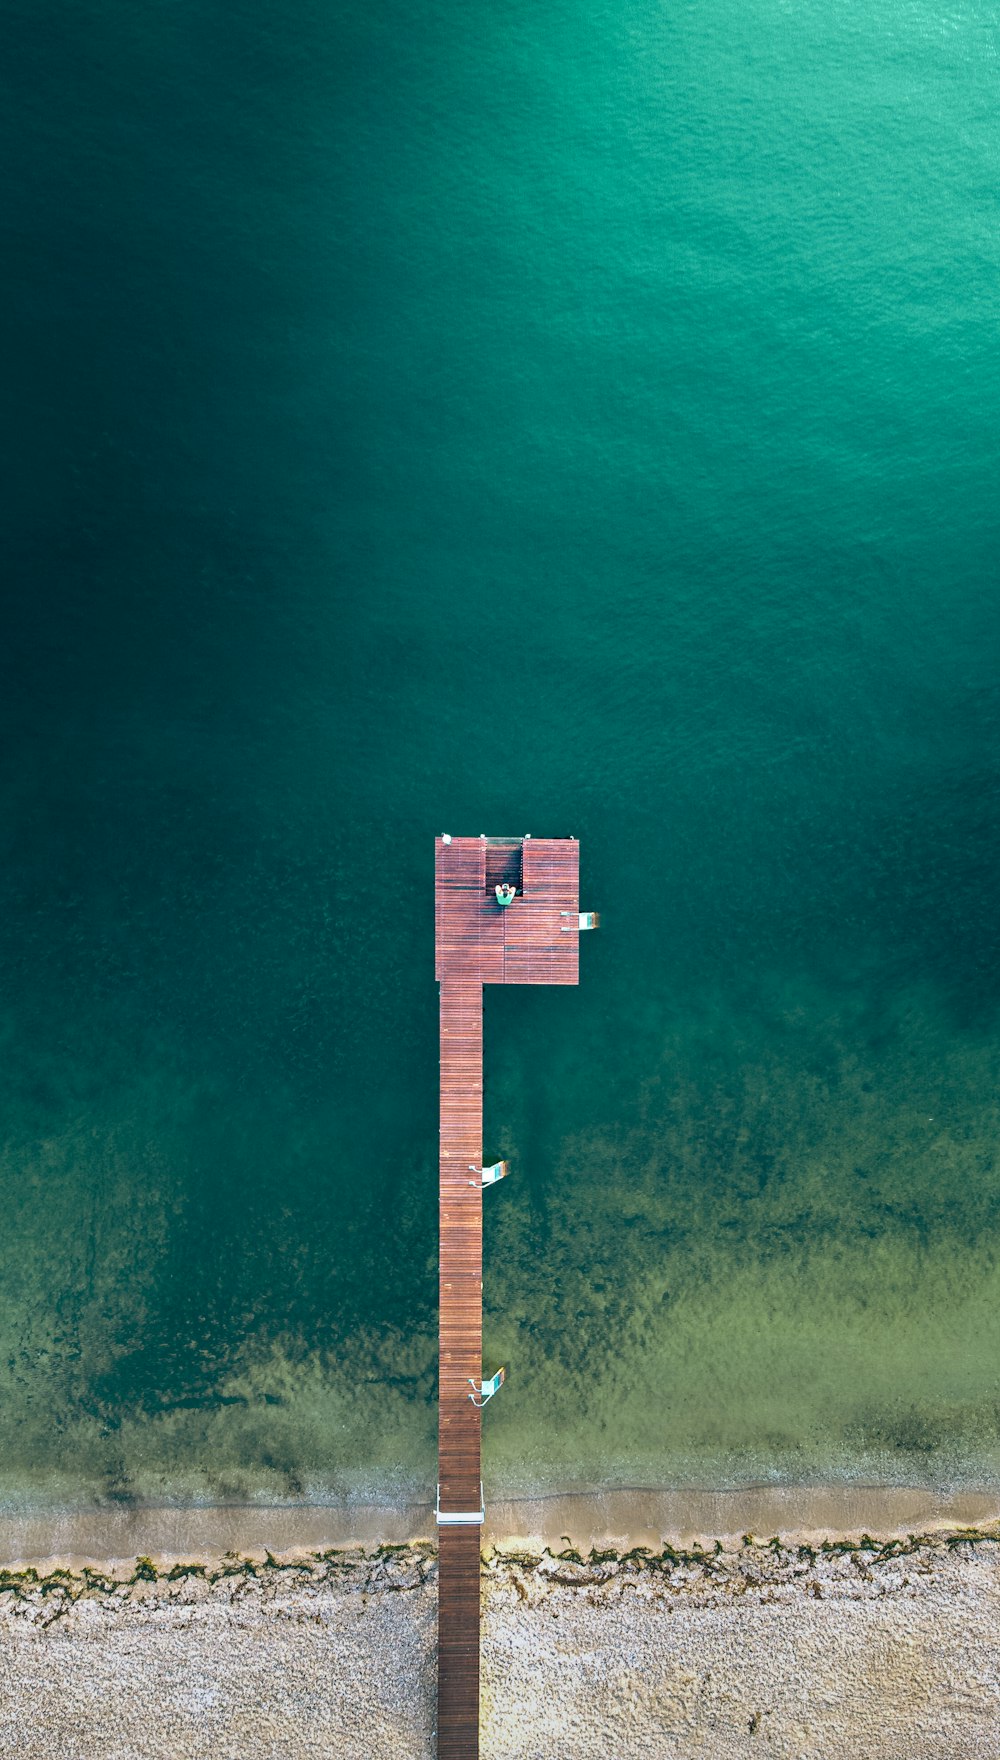 an aerial view of a wooden structure in the water